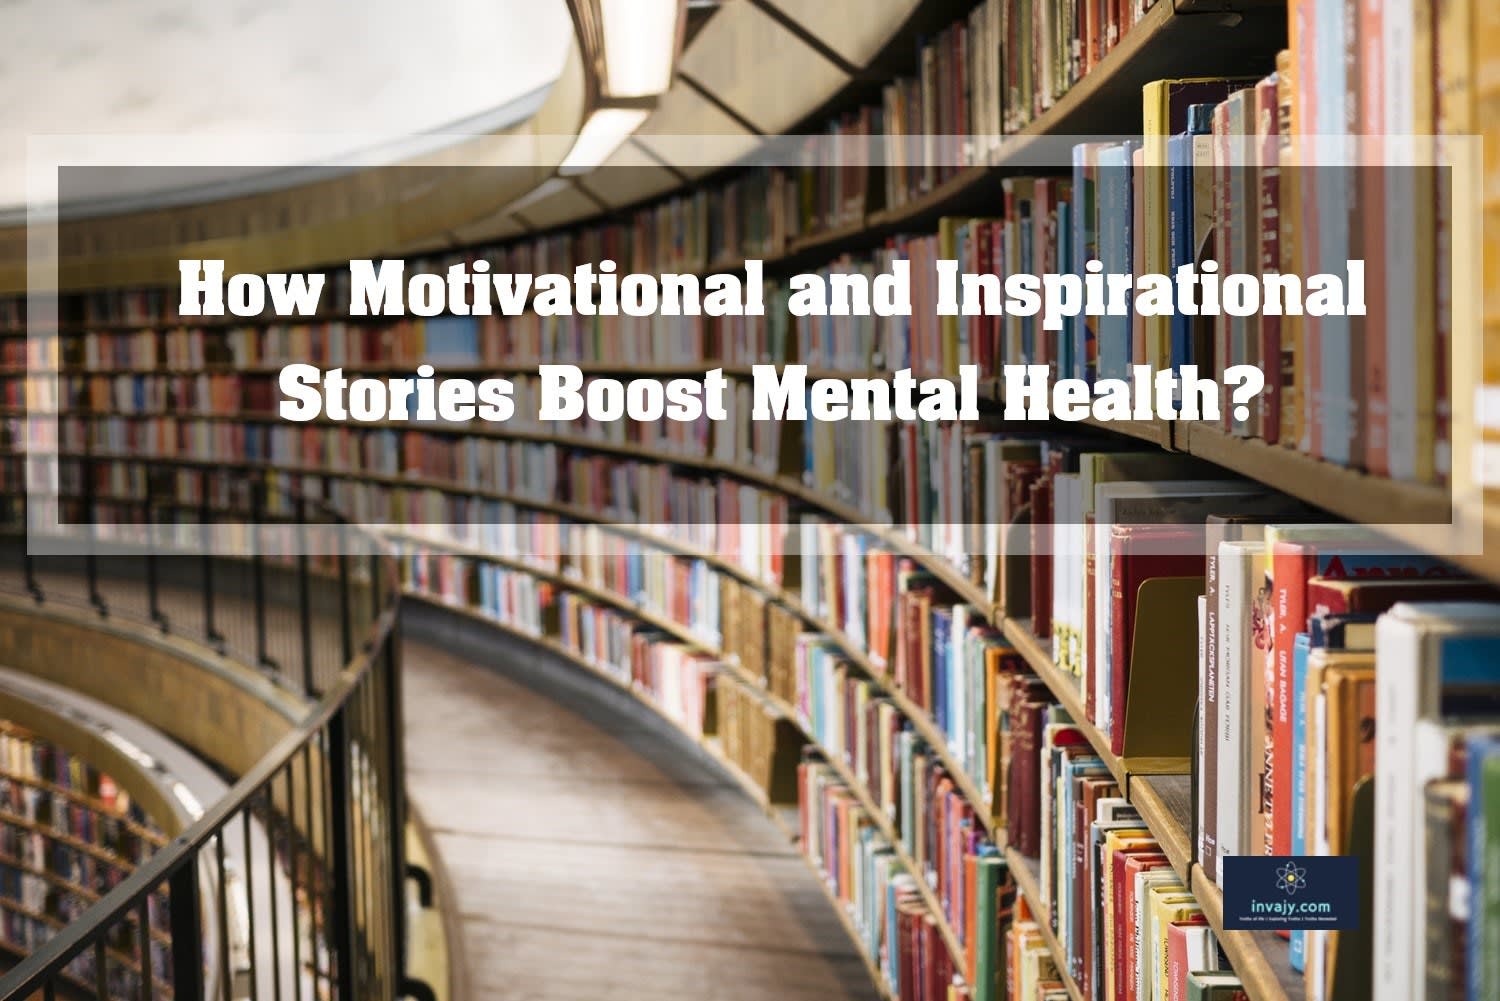 How reading motivational and inspirational stories boost mental health? | Invajy | Self Improvement | Mental Health | Quotes | Inspiration | Motivation